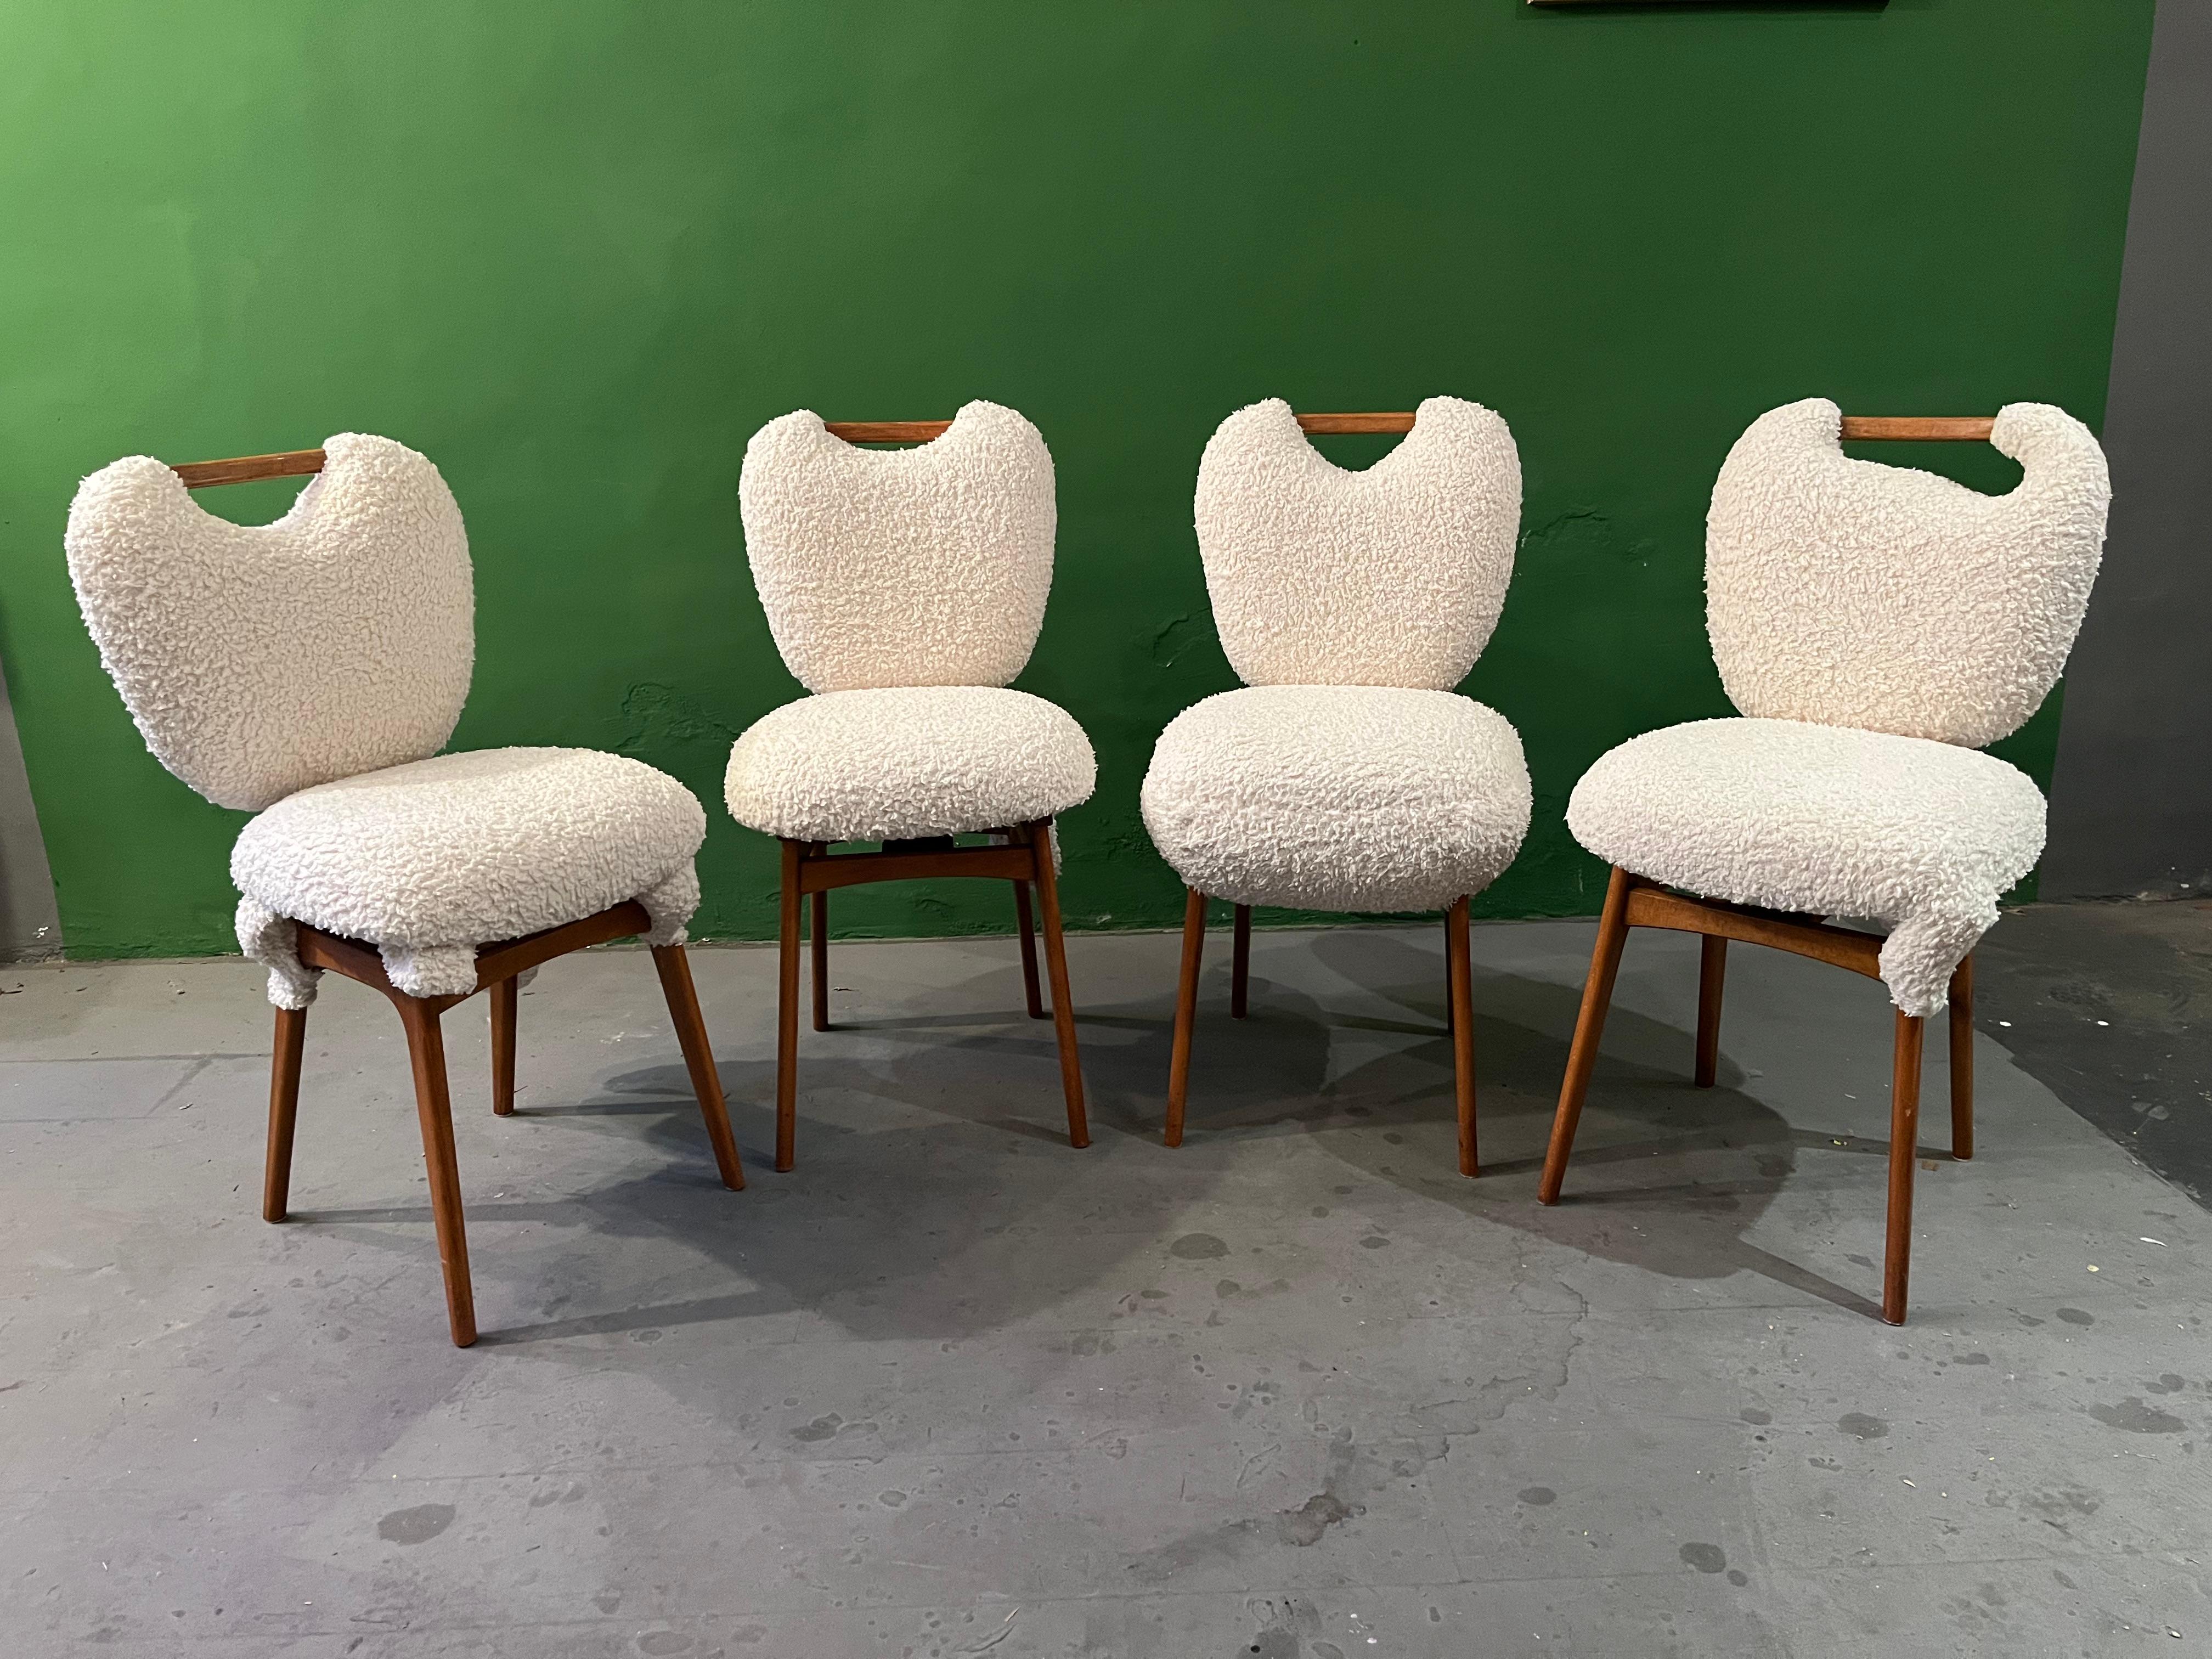 Appliqué Lamb Teddy Chairs by Markus Friedrich Staab For Sale